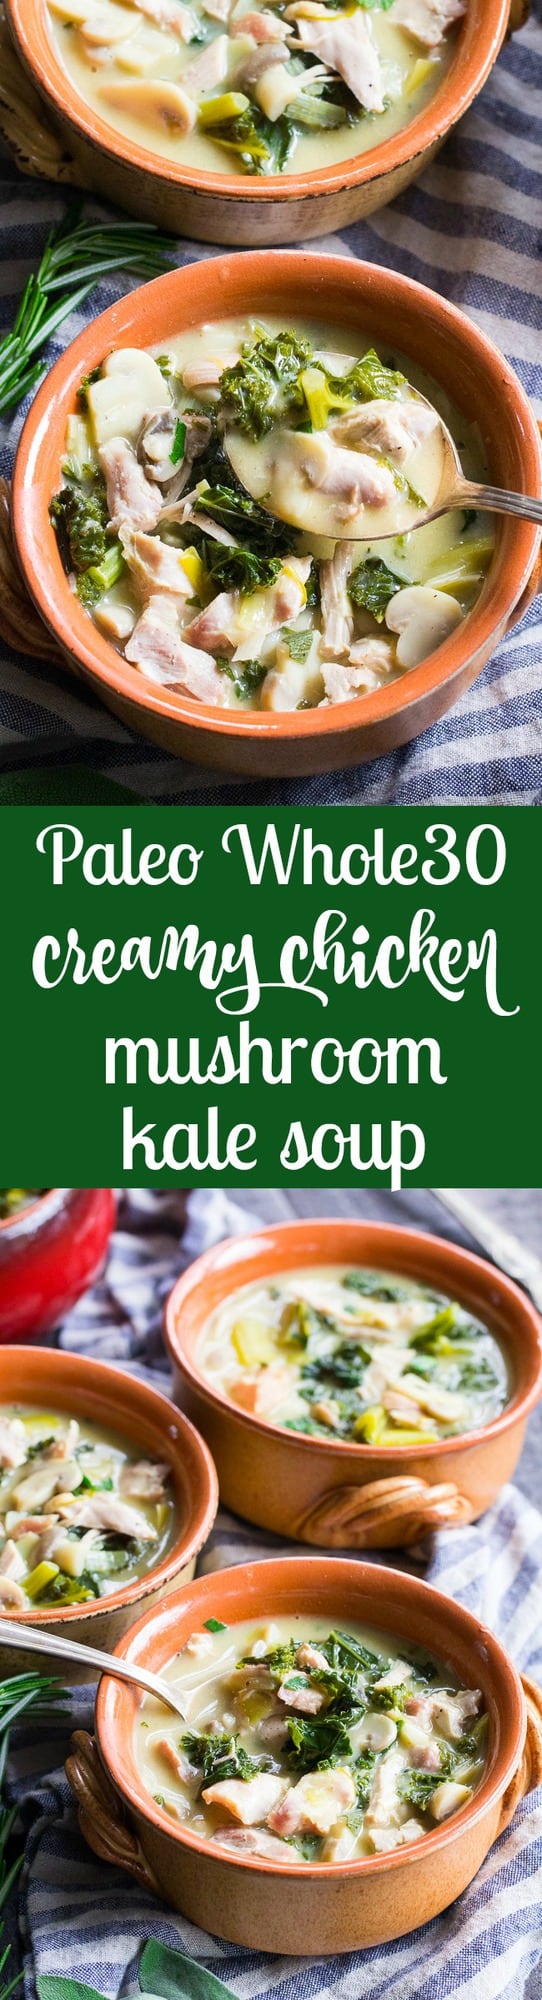 This Creamy Paleo Chicken Soup is cozy, comforting, and loaded with veggies and flavor!  Mushrooms, garlic, leeks, kale and chicken in a creamy dairy free, paleo, and Whole30 soup that's filling and healthy.  Quick and easy to make for weeknight dinners, too!